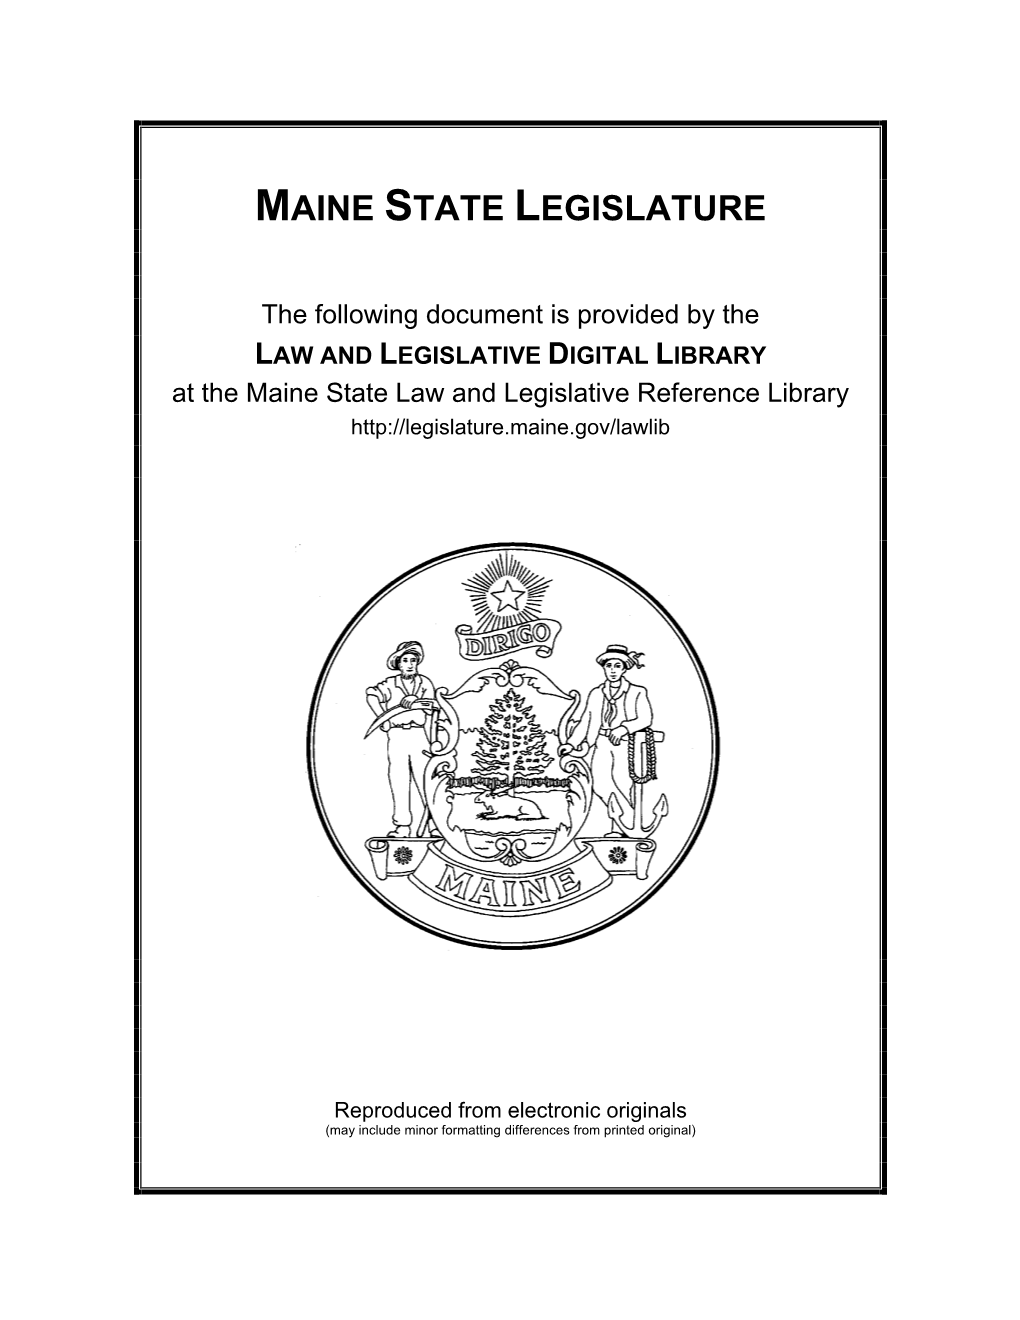 University of Maine Board of Visitors Annual Report September 2014-August 2015